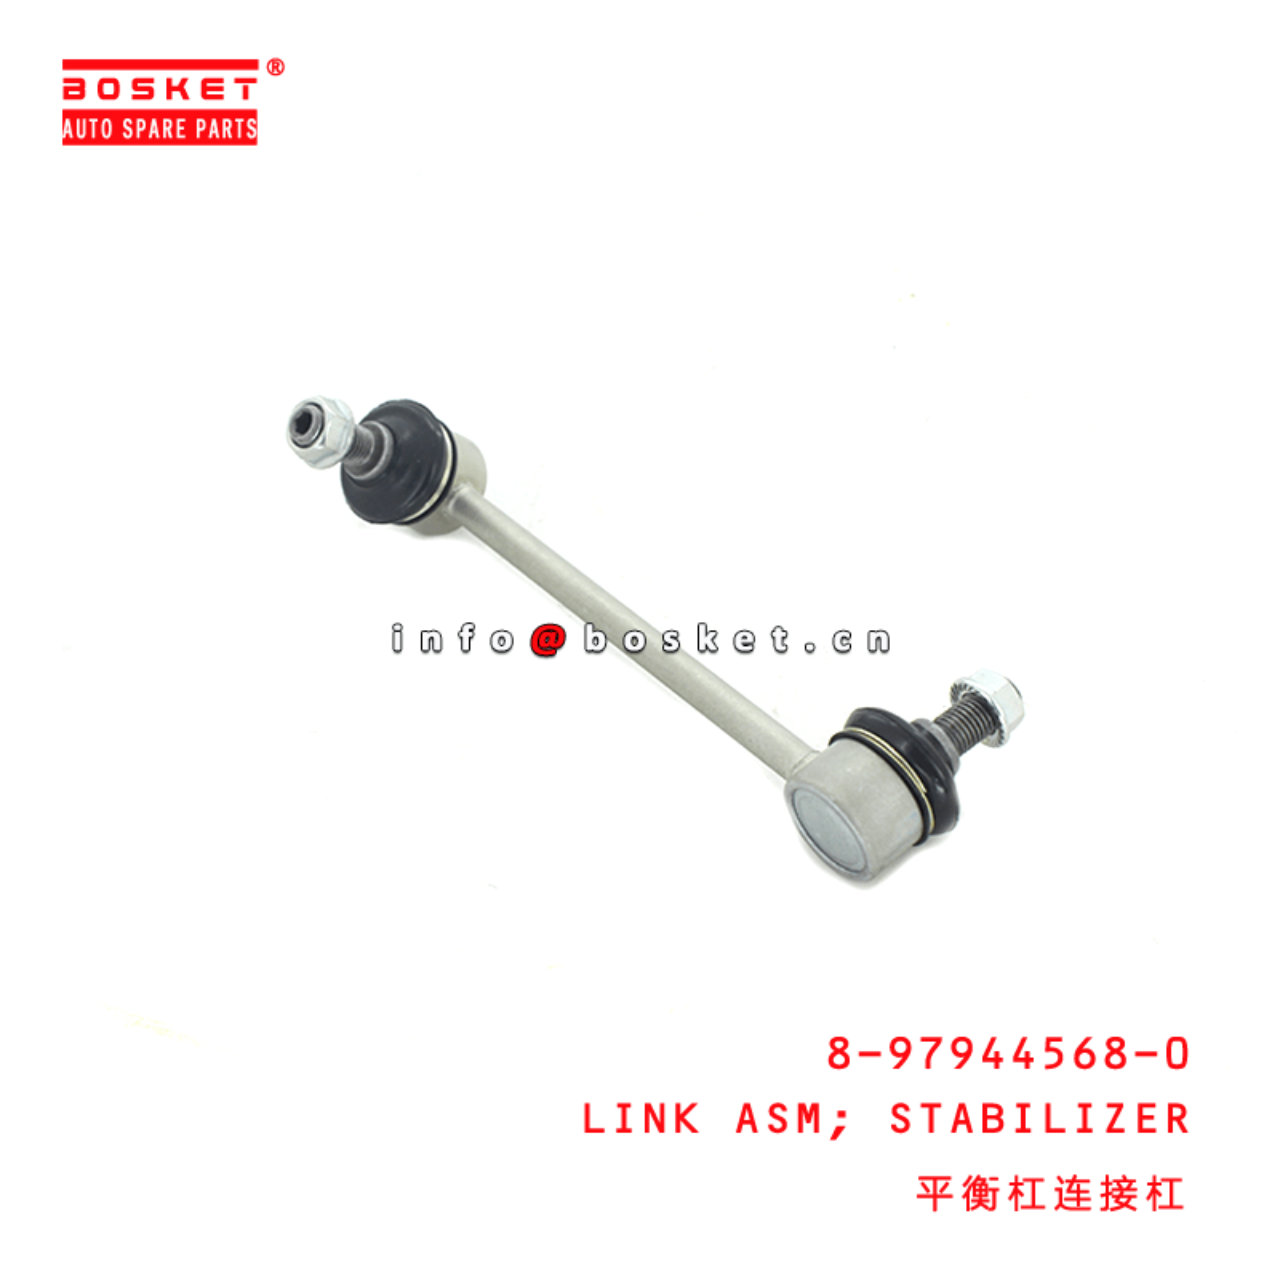 8-97944568-0 Stabilizer Link Assembly 8979445680 Suitable for ISUZU D-MAX 4X4